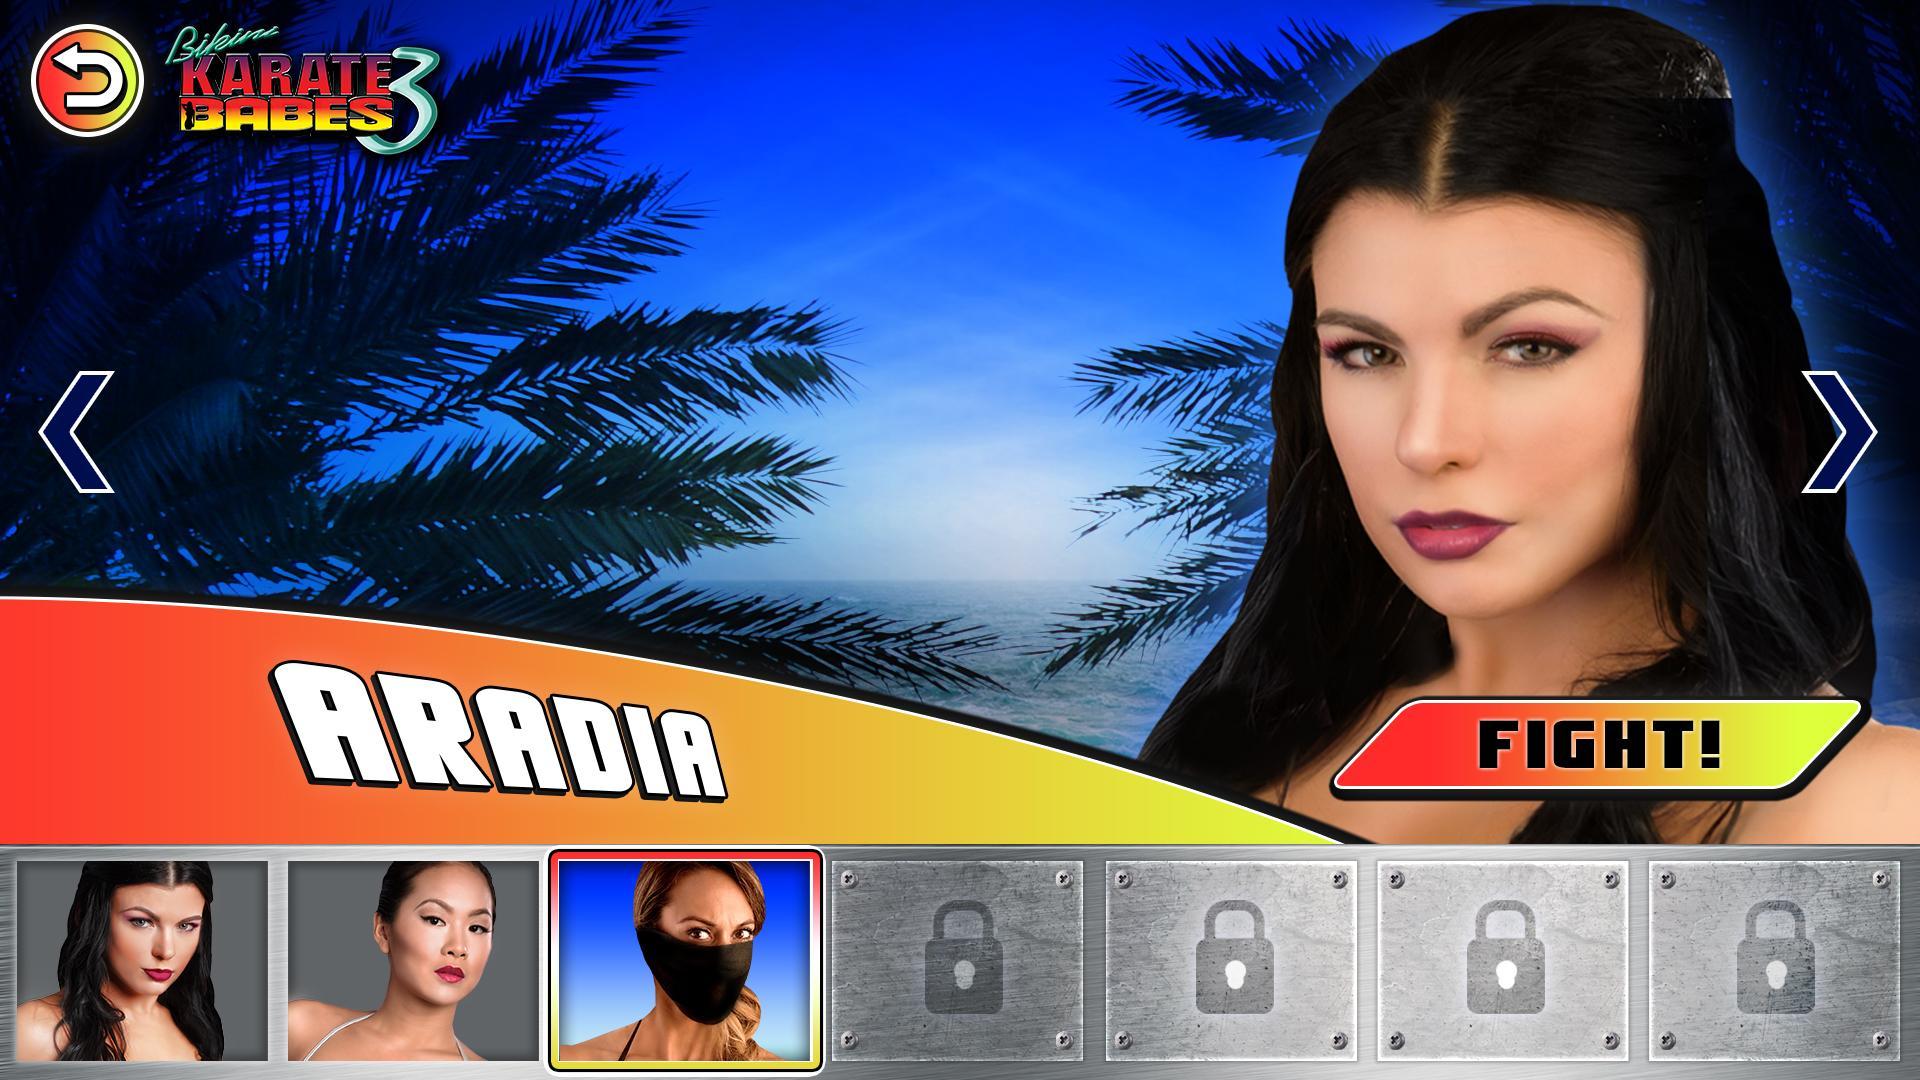 Bikini Karate Babes 3 for Android - APK Download